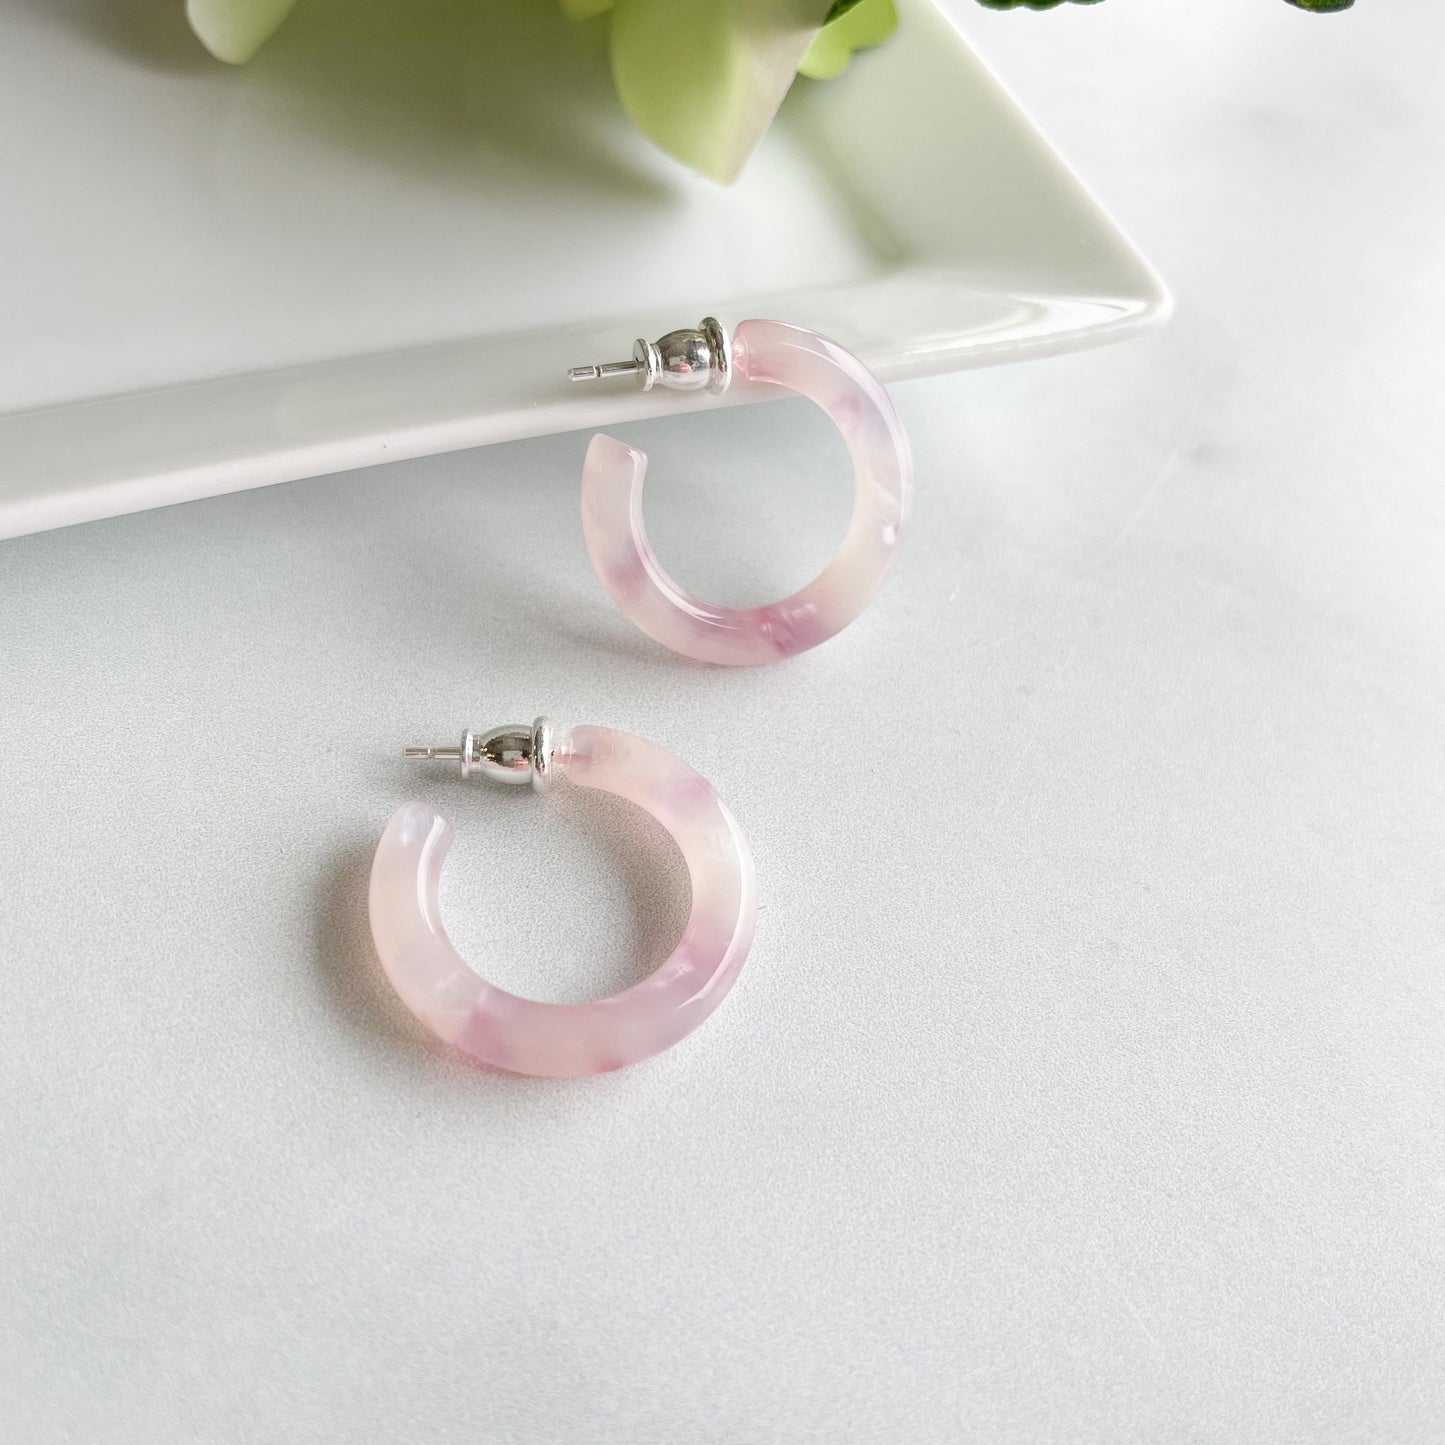 Ultra Mini Hoops in The Fantasy Collection | Purple Pink Unicorn Mermaid Green White Pearl Hoop Earrings 925 Sterling Silver Posts